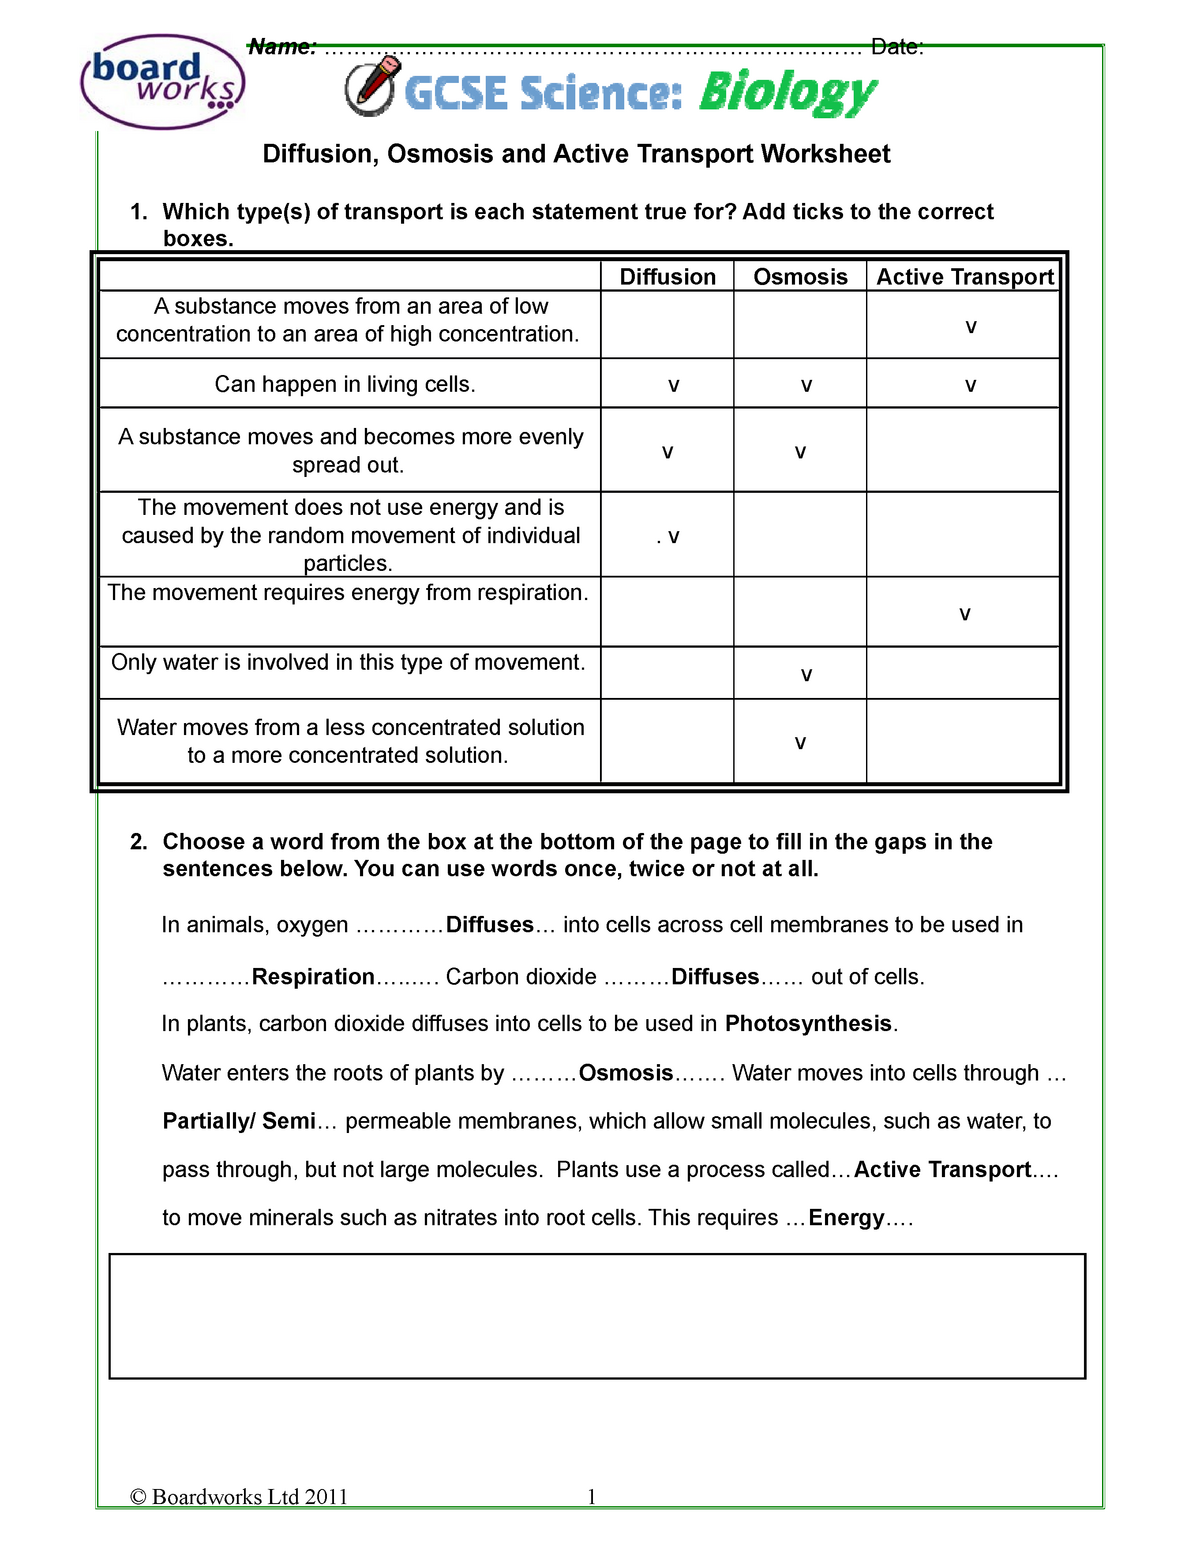 Diffusion Osmosis and Active Transport Worksheet F20 - Name Intended For Cell Transport Worksheet Biology Answers